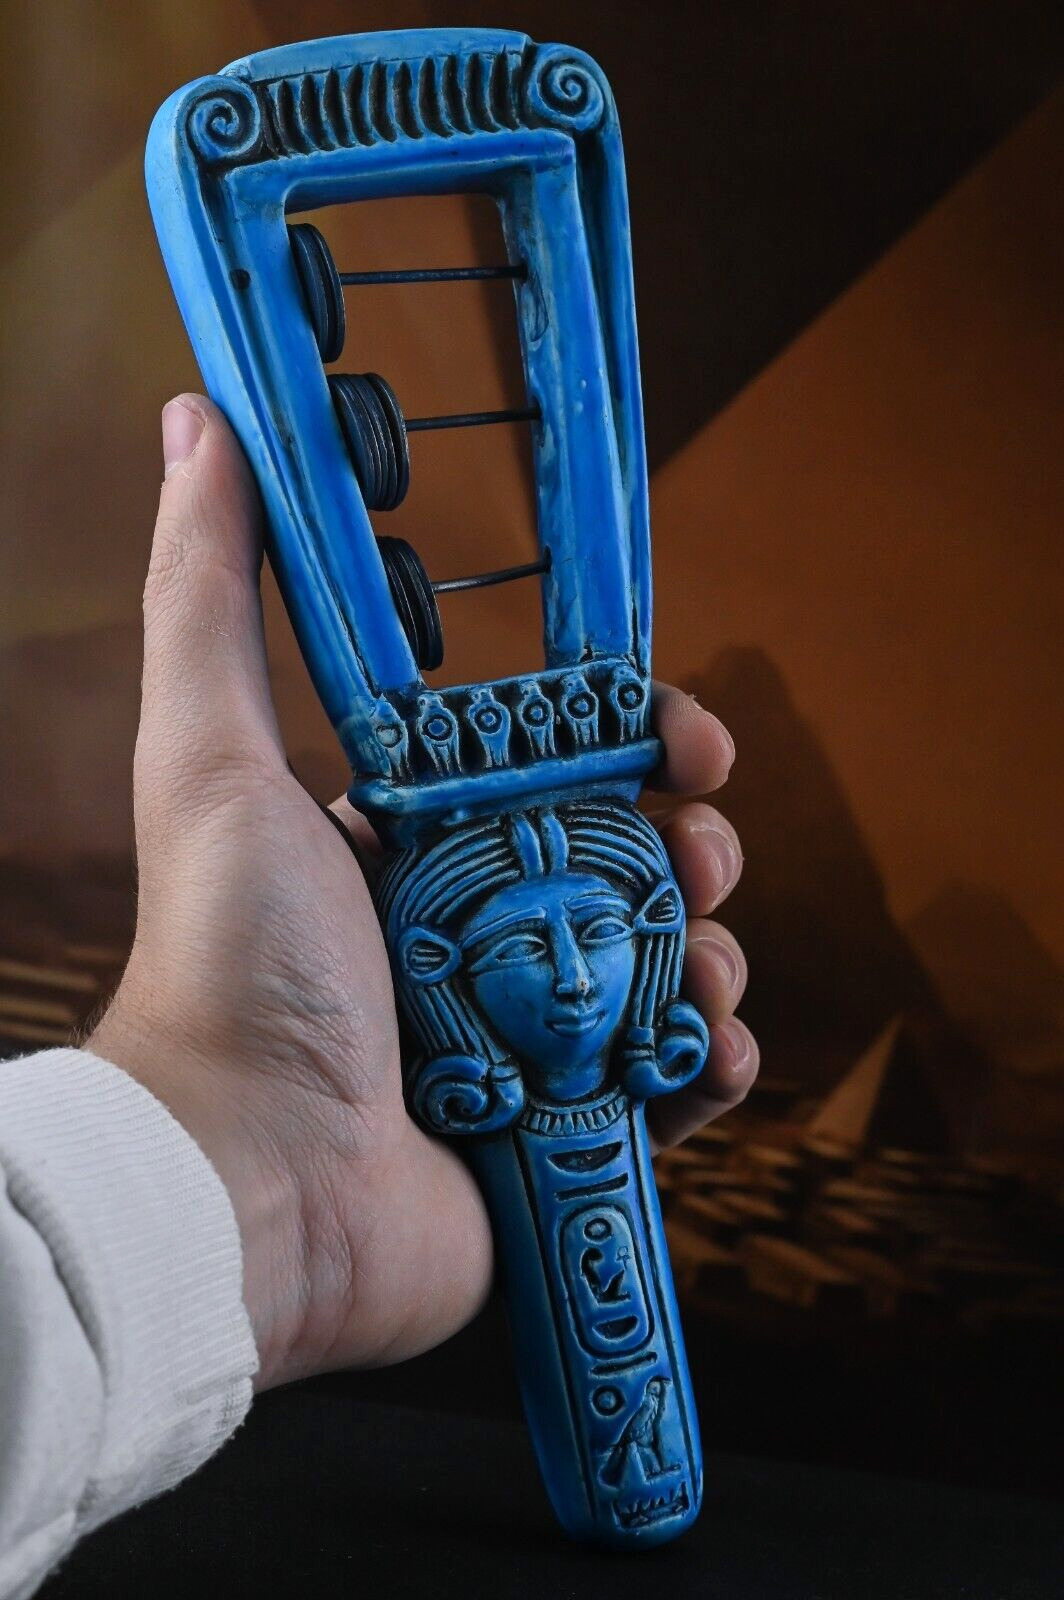 Egyptian art Hathor Sistrum (Musical Instrument) Replica from her collection